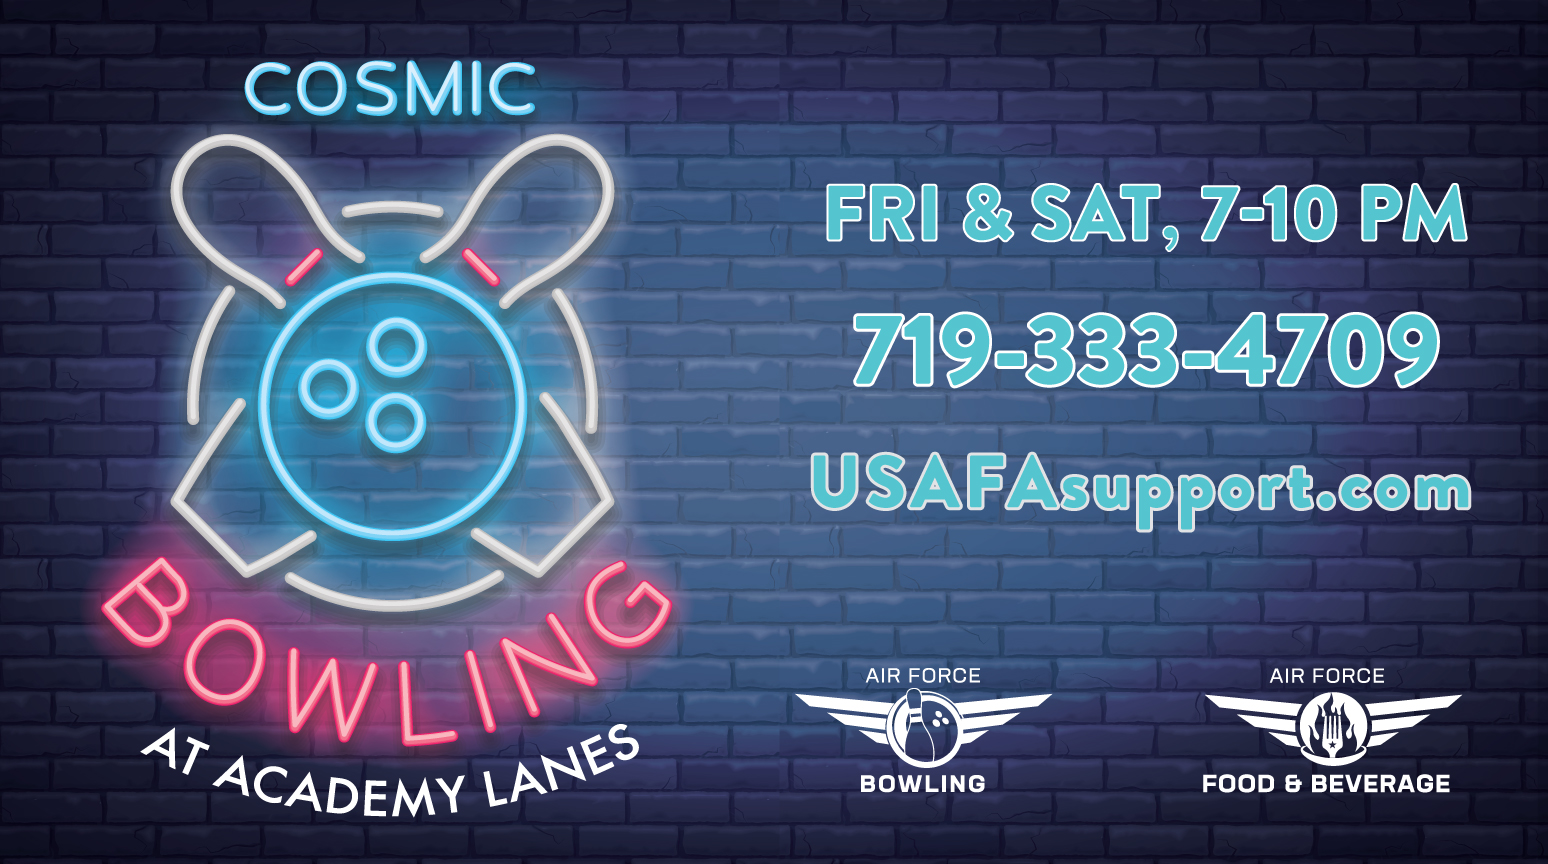 Bowling_CosmicIsBack_sld